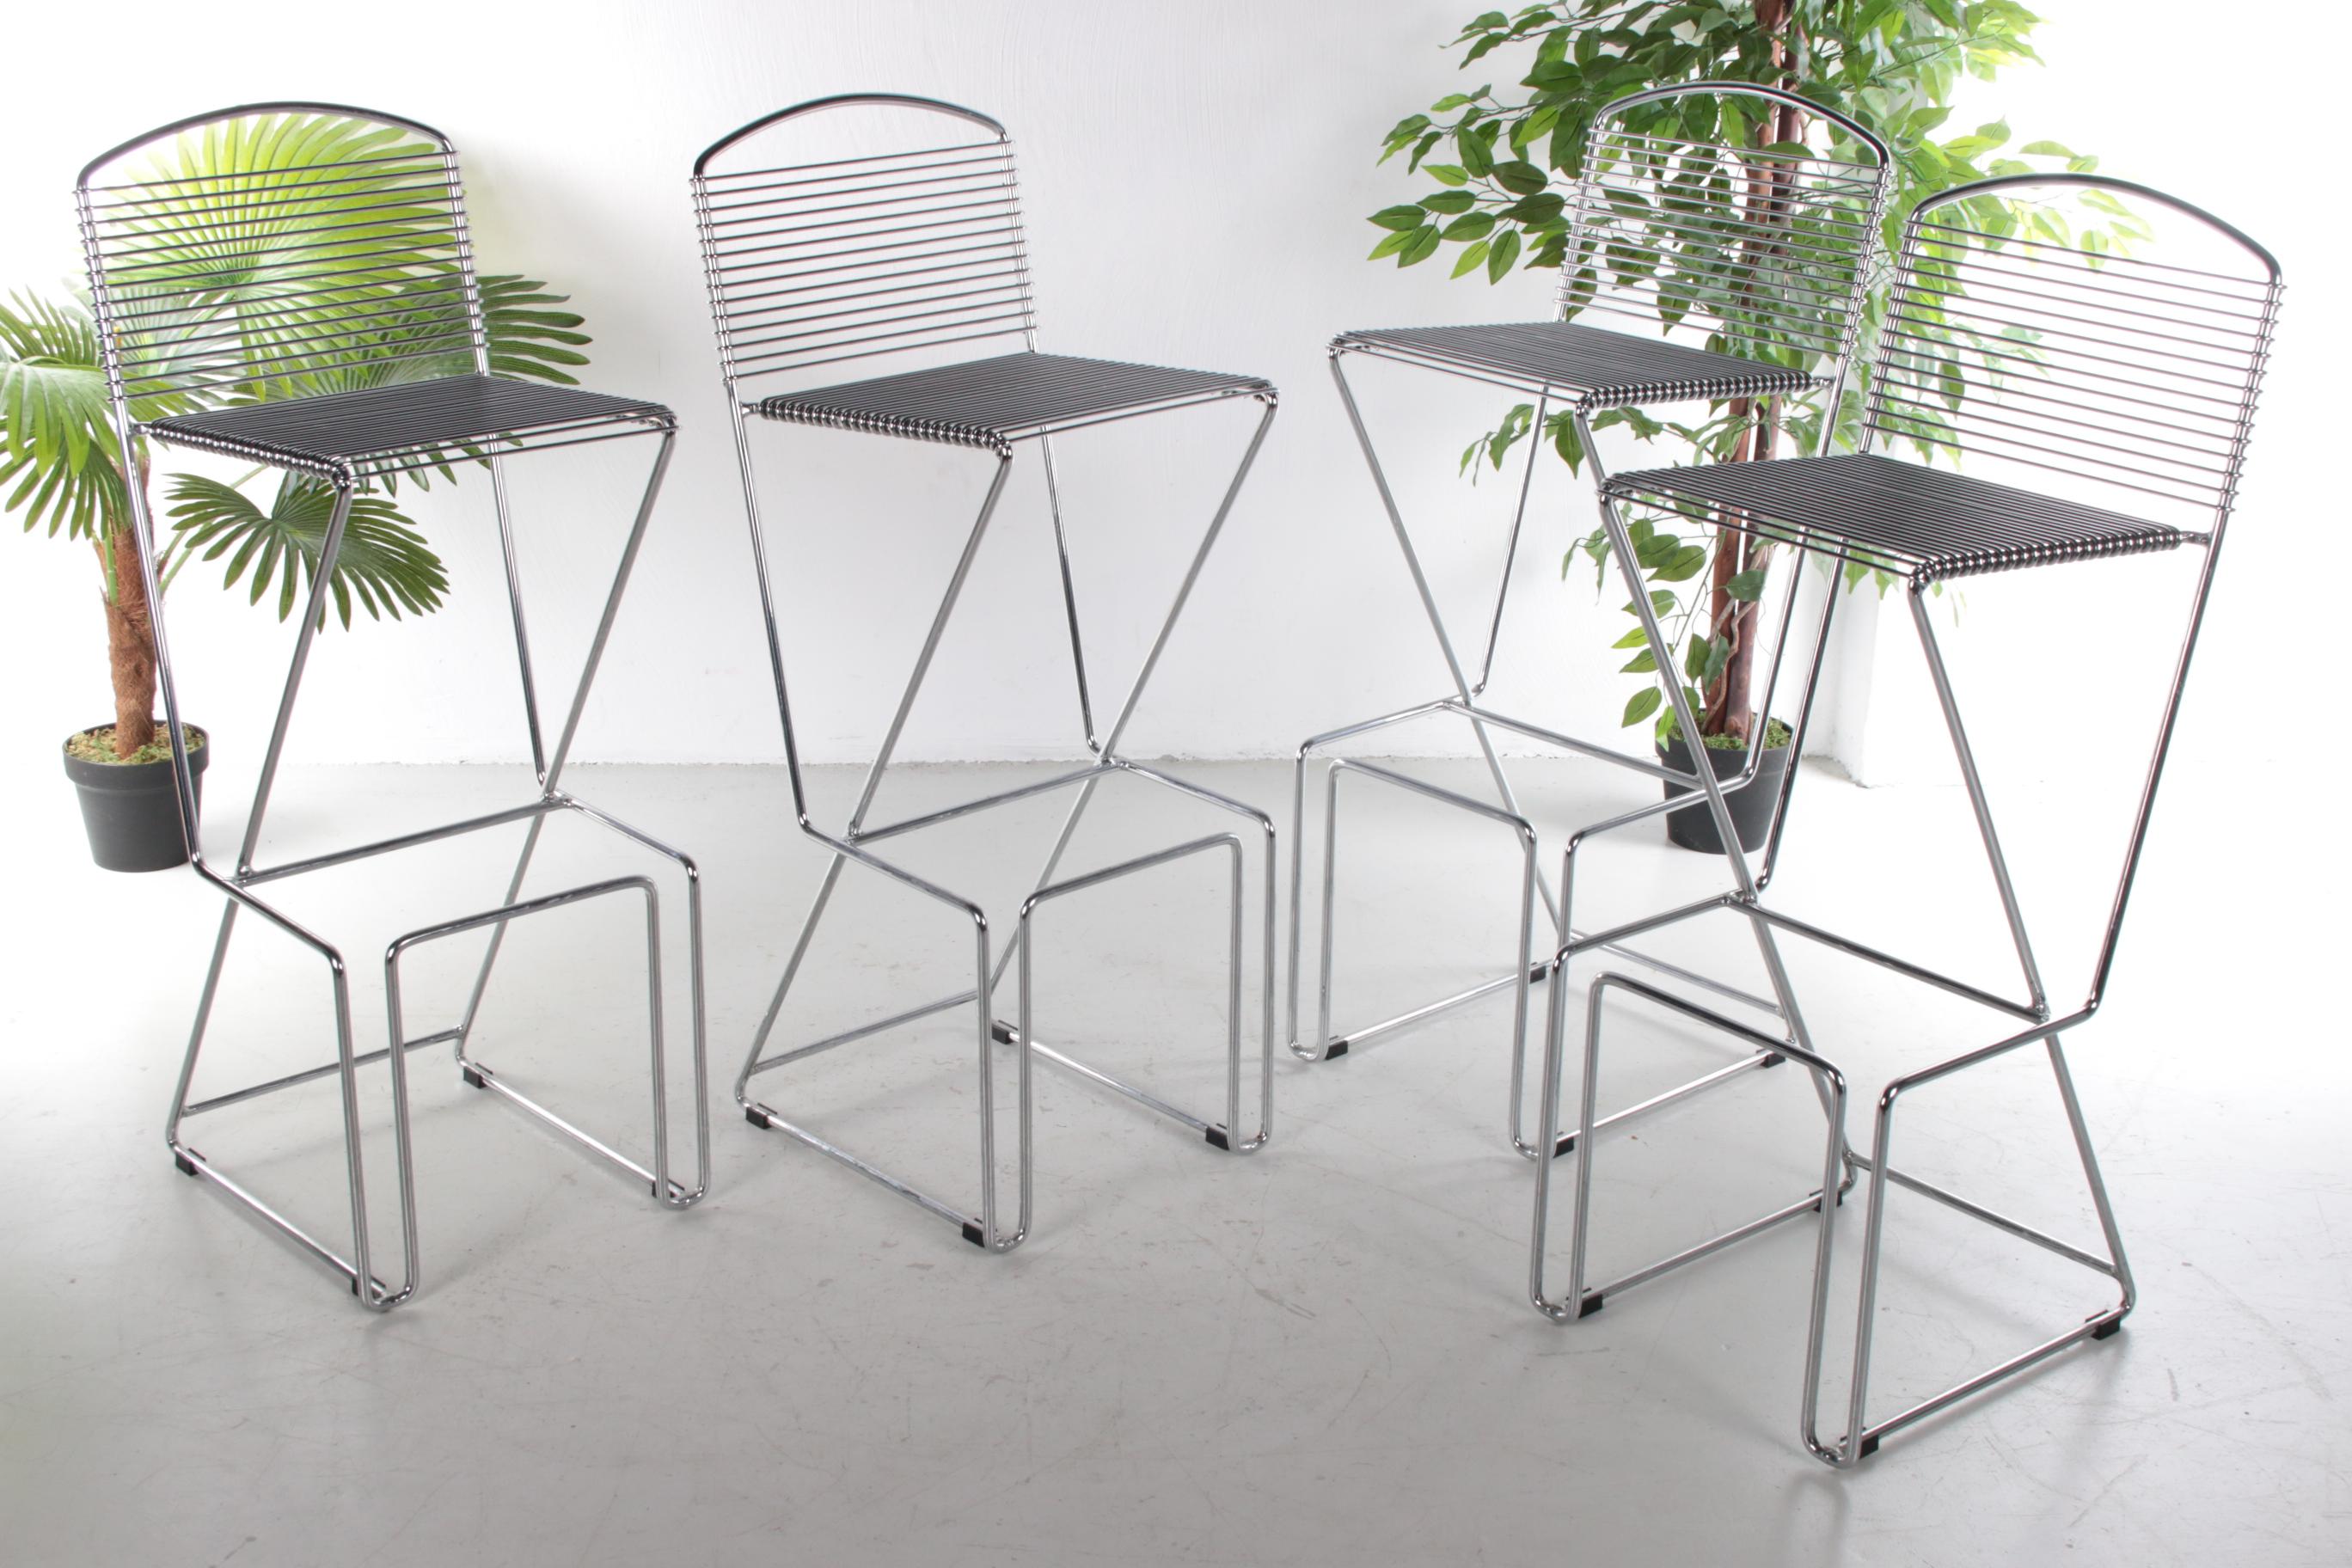 Set of 4 bar stools by Till Behrens by Schlubach, 1980


Vintage bar stools design by Till Behrens by Schlubach.

A fantastic pair of vintage bar/kitchen stools by Till Behrens for Schlubach. A handsome set of stools of exceptional shape, the